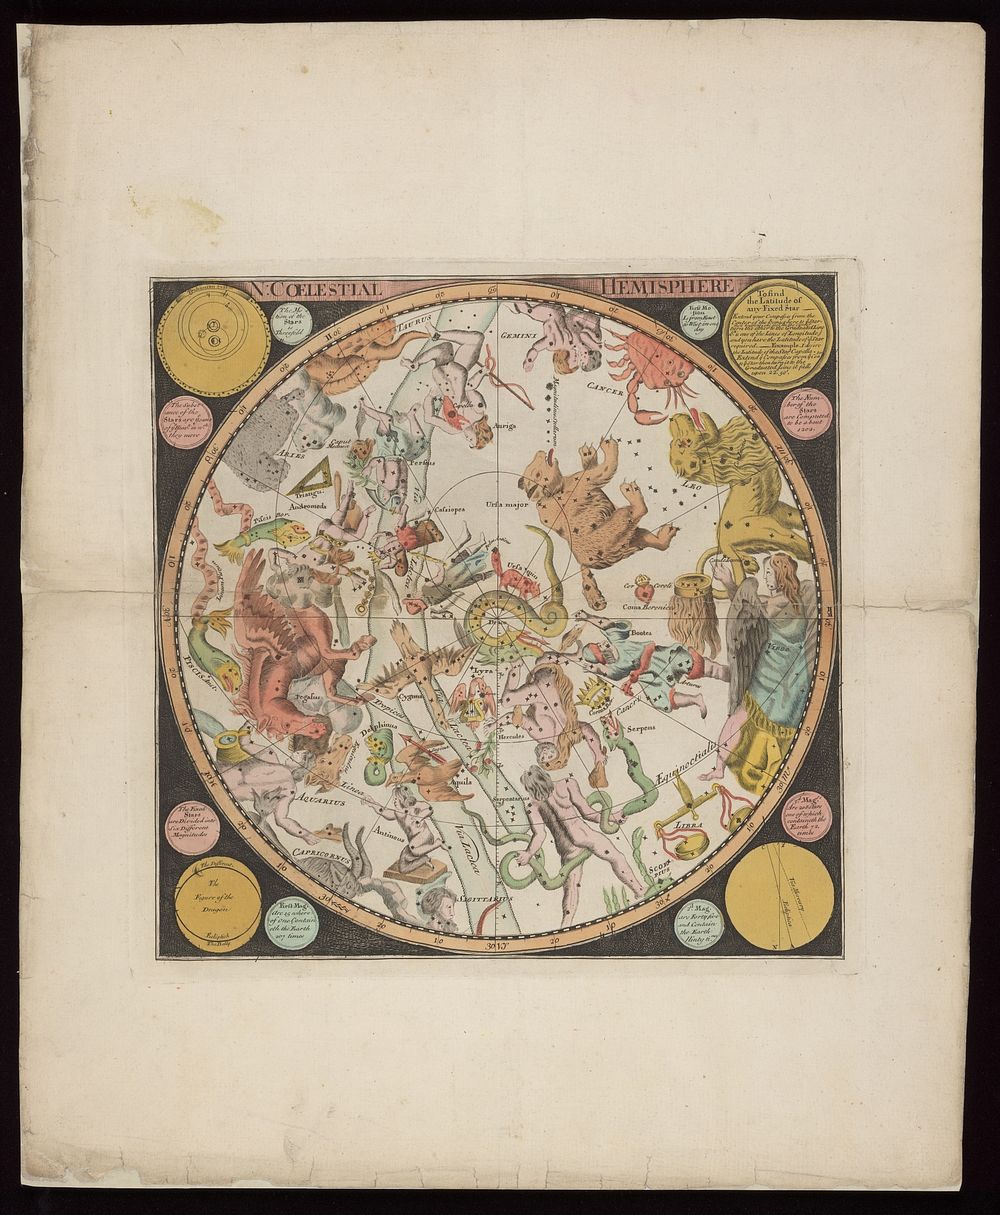 Astronomy: a star map of the night sky in the northern hemisphere, with the names of the constellations. Coloured engraving.